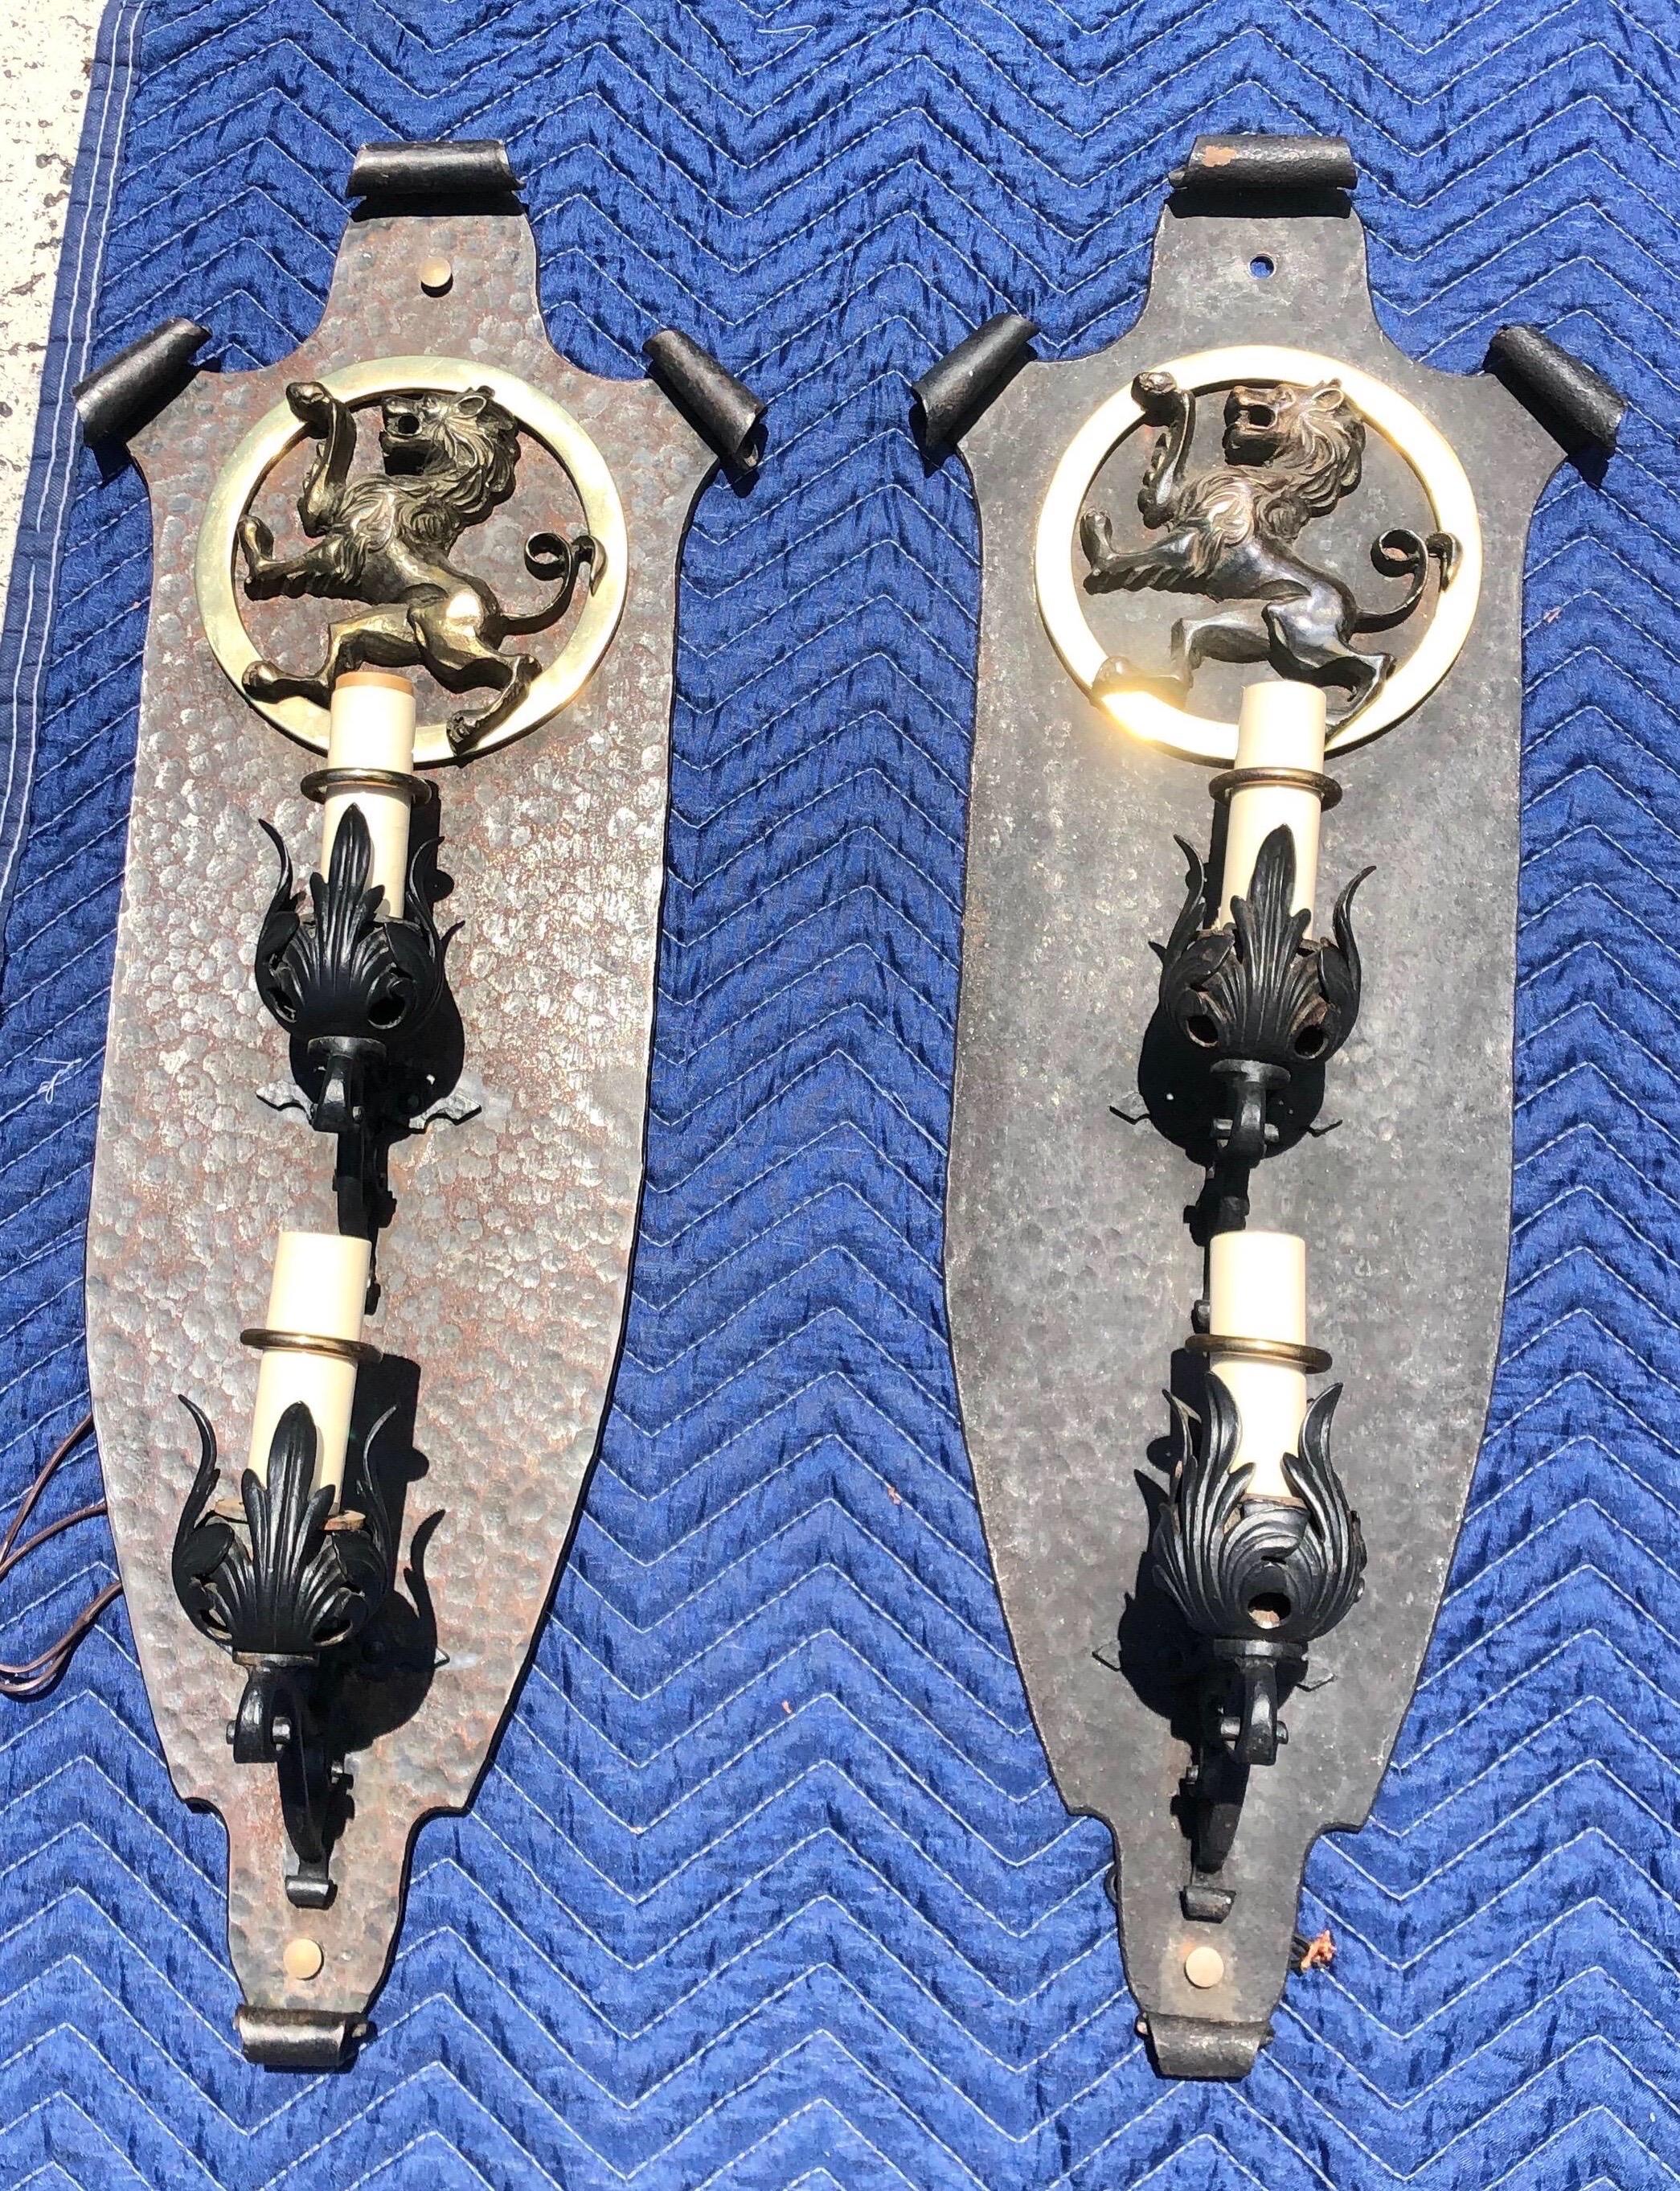 Incredible set of 8 Oscar Bach style sconces in hand-hammered metal and polished brass from the Arts & Crafts period. 


Available by the pair- 3 pairs are 30” x 11